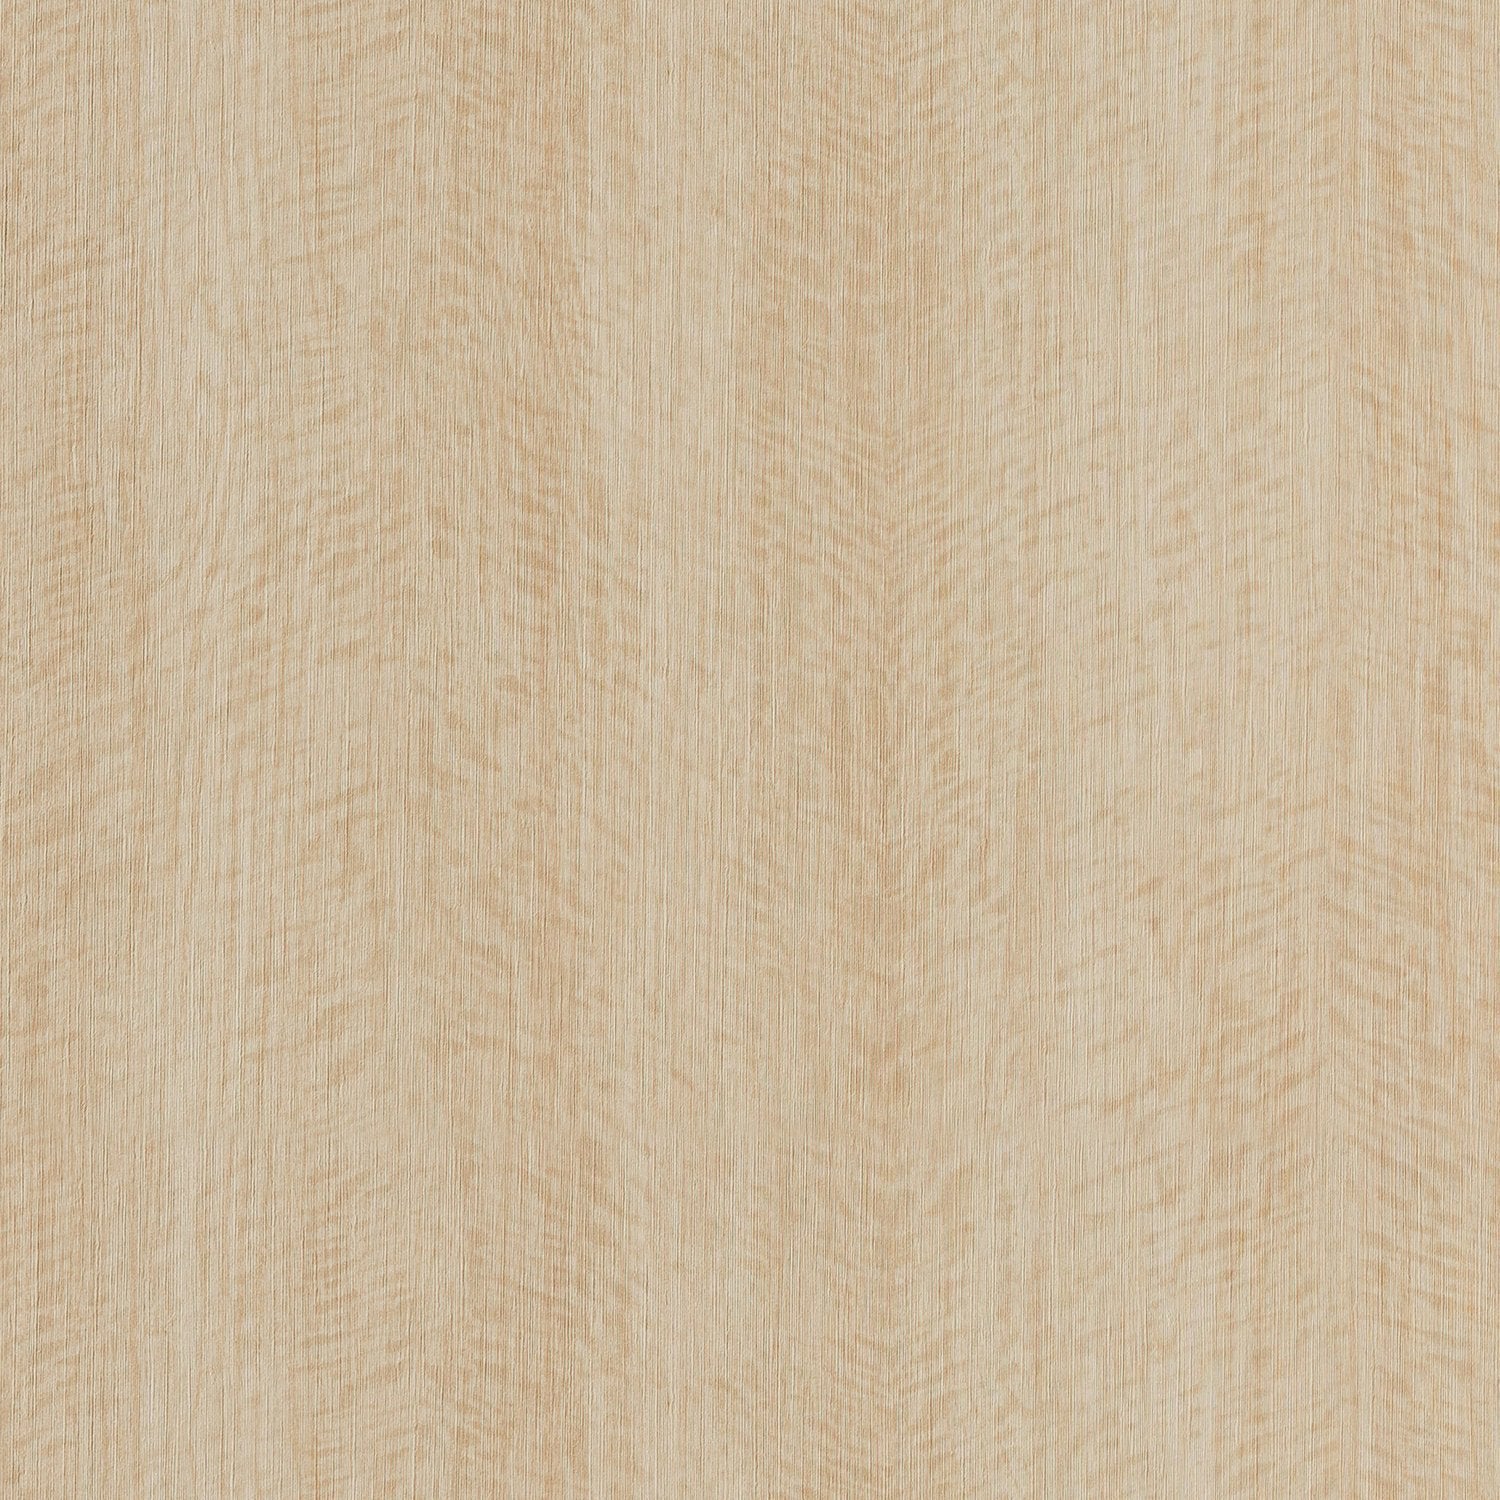 Woodn't It Be Nice - Y47882 - Wallcovering - Vycon - Kube Contract